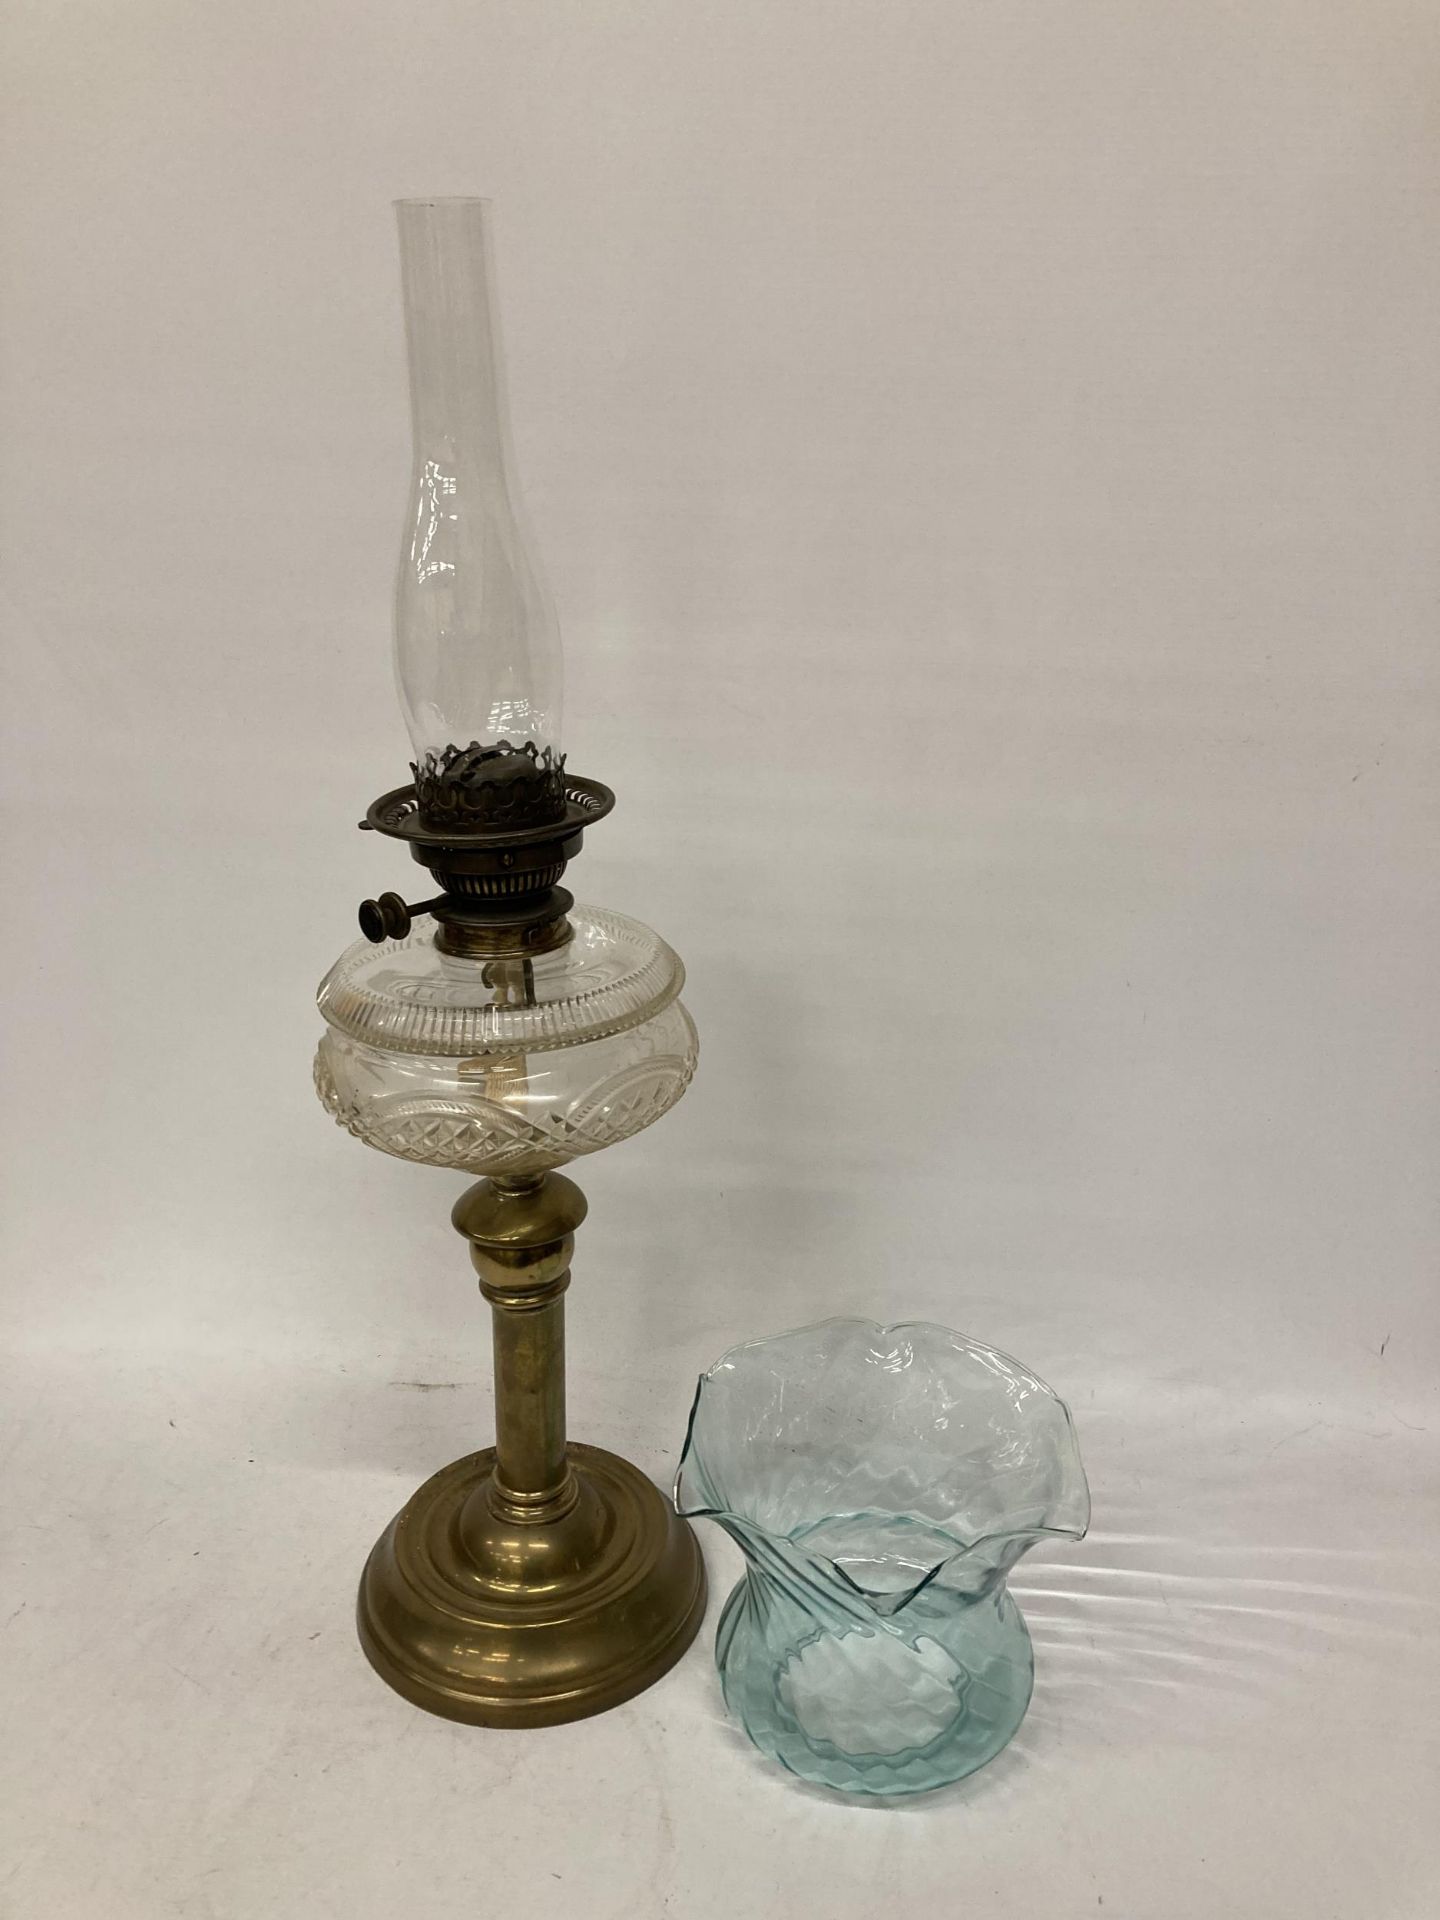 A VINTAGE OIL LAMP WITH BRASS BASE, CLEAR CUT GLASS OIL RESERVOIR, TURQUOISE SHADE AND GLASS FUNNEL - Bild 4 aus 4